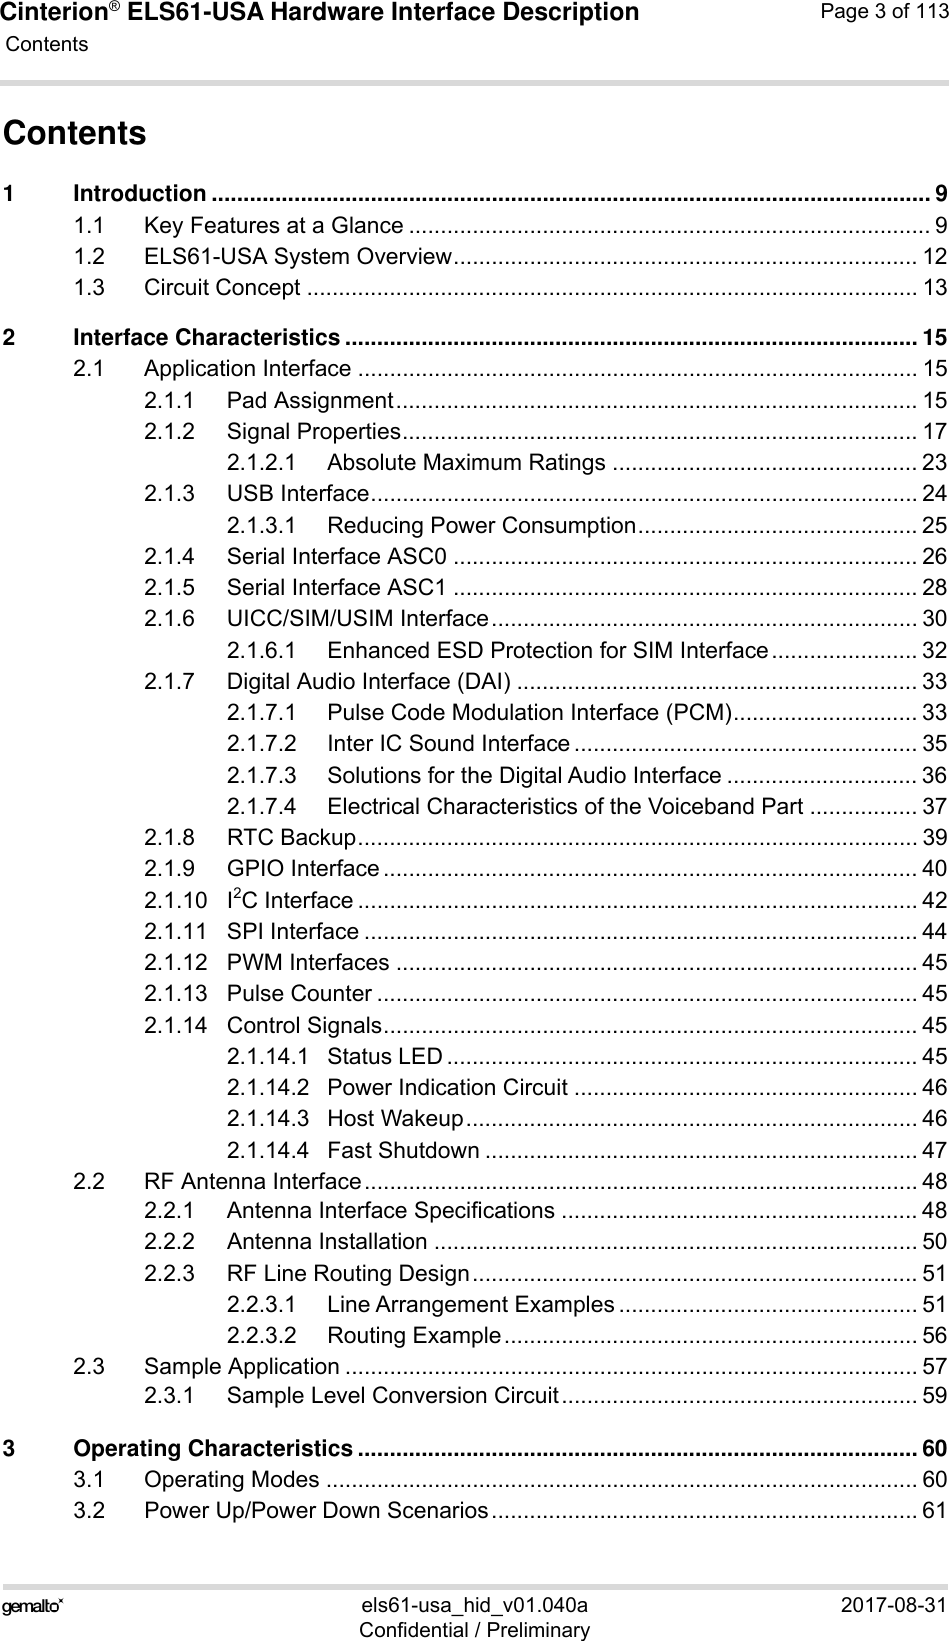 Cinterion® ELS61-USA Hardware Interface Description Contents113els61-usa_hid_v01.040a 2017-08-31Confidential / PreliminaryPage 3 of 113Contents1 Introduction ................................................................................................................. 91.1 Key Features at a Glance .................................................................................. 91.2 ELS61-USA System Overview......................................................................... 121.3 Circuit Concept ................................................................................................ 132 Interface Characteristics .......................................................................................... 152.1 Application Interface ........................................................................................ 152.1.1 Pad Assignment.................................................................................. 152.1.2 Signal Properties................................................................................. 172.1.2.1 Absolute Maximum Ratings ................................................ 232.1.3 USB Interface...................................................................................... 242.1.3.1 Reducing Power Consumption............................................ 252.1.4 Serial Interface ASC0 ......................................................................... 262.1.5 Serial Interface ASC1 ......................................................................... 282.1.6 UICC/SIM/USIM Interface................................................................... 302.1.6.1 Enhanced ESD Protection for SIM Interface....................... 322.1.7 Digital Audio Interface (DAI) ............................................................... 332.1.7.1 Pulse Code Modulation Interface (PCM)............................. 332.1.7.2 Inter IC Sound Interface ...................................................... 352.1.7.3 Solutions for the Digital Audio Interface .............................. 362.1.7.4 Electrical Characteristics of the Voiceband Part ................. 372.1.8 RTC Backup........................................................................................ 392.1.9 GPIO Interface .................................................................................... 402.1.10 I2C Interface ........................................................................................ 422.1.11 SPI Interface ....................................................................................... 442.1.12 PWM Interfaces .................................................................................. 452.1.13 Pulse Counter ..................................................................................... 452.1.14 Control Signals.................................................................................... 452.1.14.1 Status LED .......................................................................... 452.1.14.2 Power Indication Circuit ...................................................... 462.1.14.3 Host Wakeup....................................................................... 462.1.14.4 Fast Shutdown .................................................................... 472.2 RF Antenna Interface....................................................................................... 482.2.1 Antenna Interface Specifications ........................................................ 482.2.2 Antenna Installation ............................................................................ 502.2.3 RF Line Routing Design...................................................................... 512.2.3.1 Line Arrangement Examples ............................................... 512.2.3.2 Routing Example................................................................. 562.3 Sample Application .......................................................................................... 572.3.1 Sample Level Conversion Circuit........................................................ 593 Operating Characteristics ........................................................................................ 603.1 Operating Modes ............................................................................................. 603.2 Power Up/Power Down Scenarios................................................................... 61